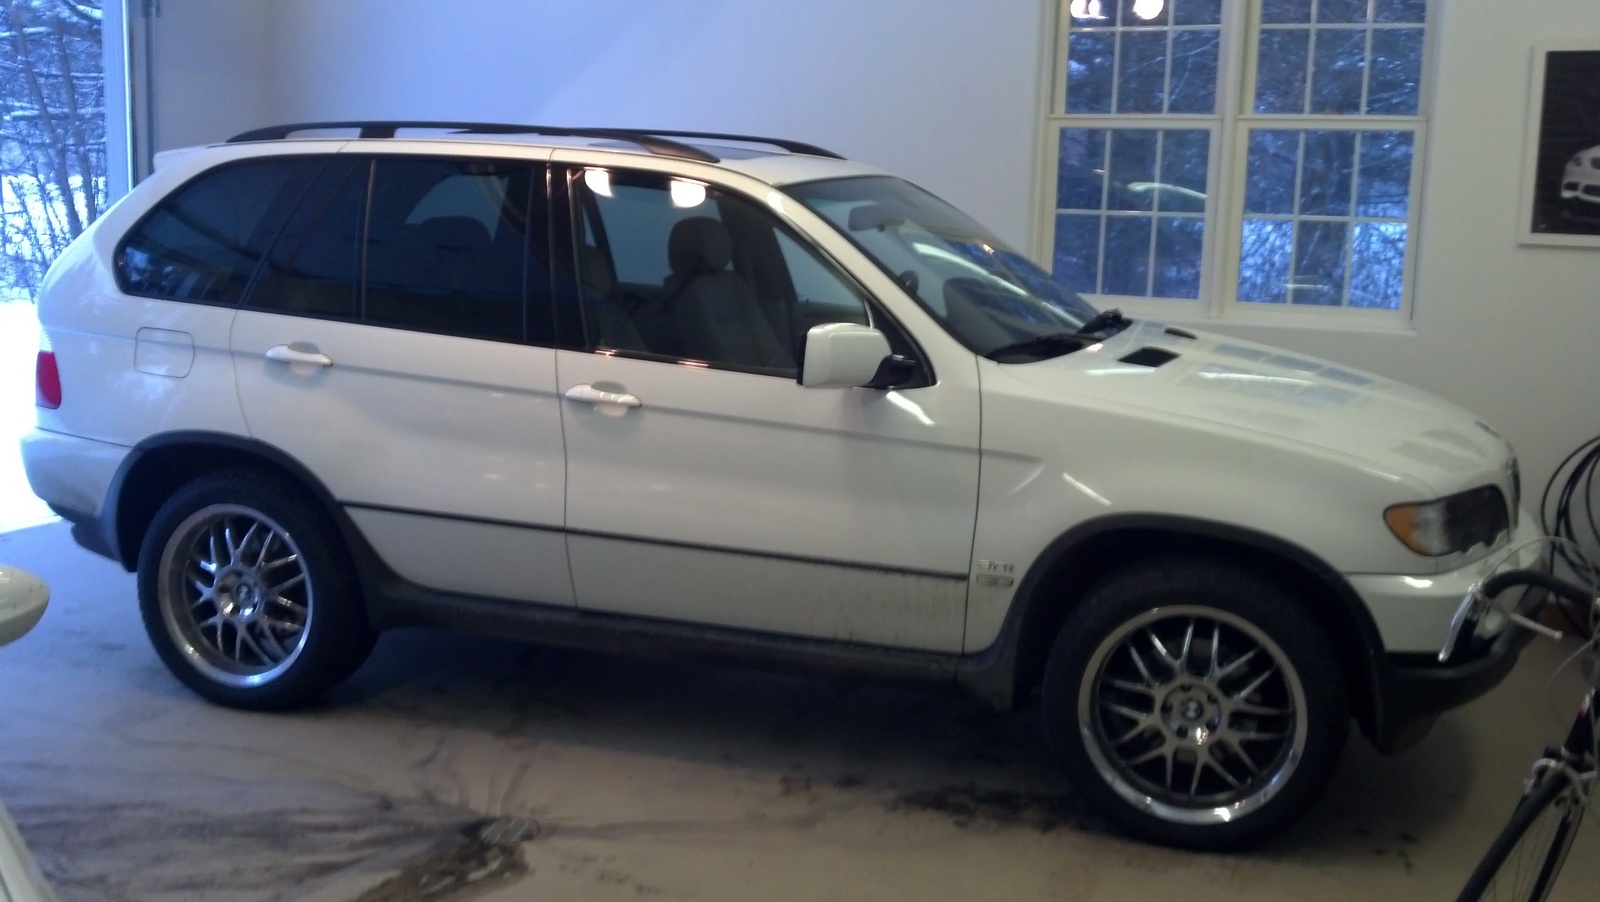 Bmw x5 for sale in wisconsin #1